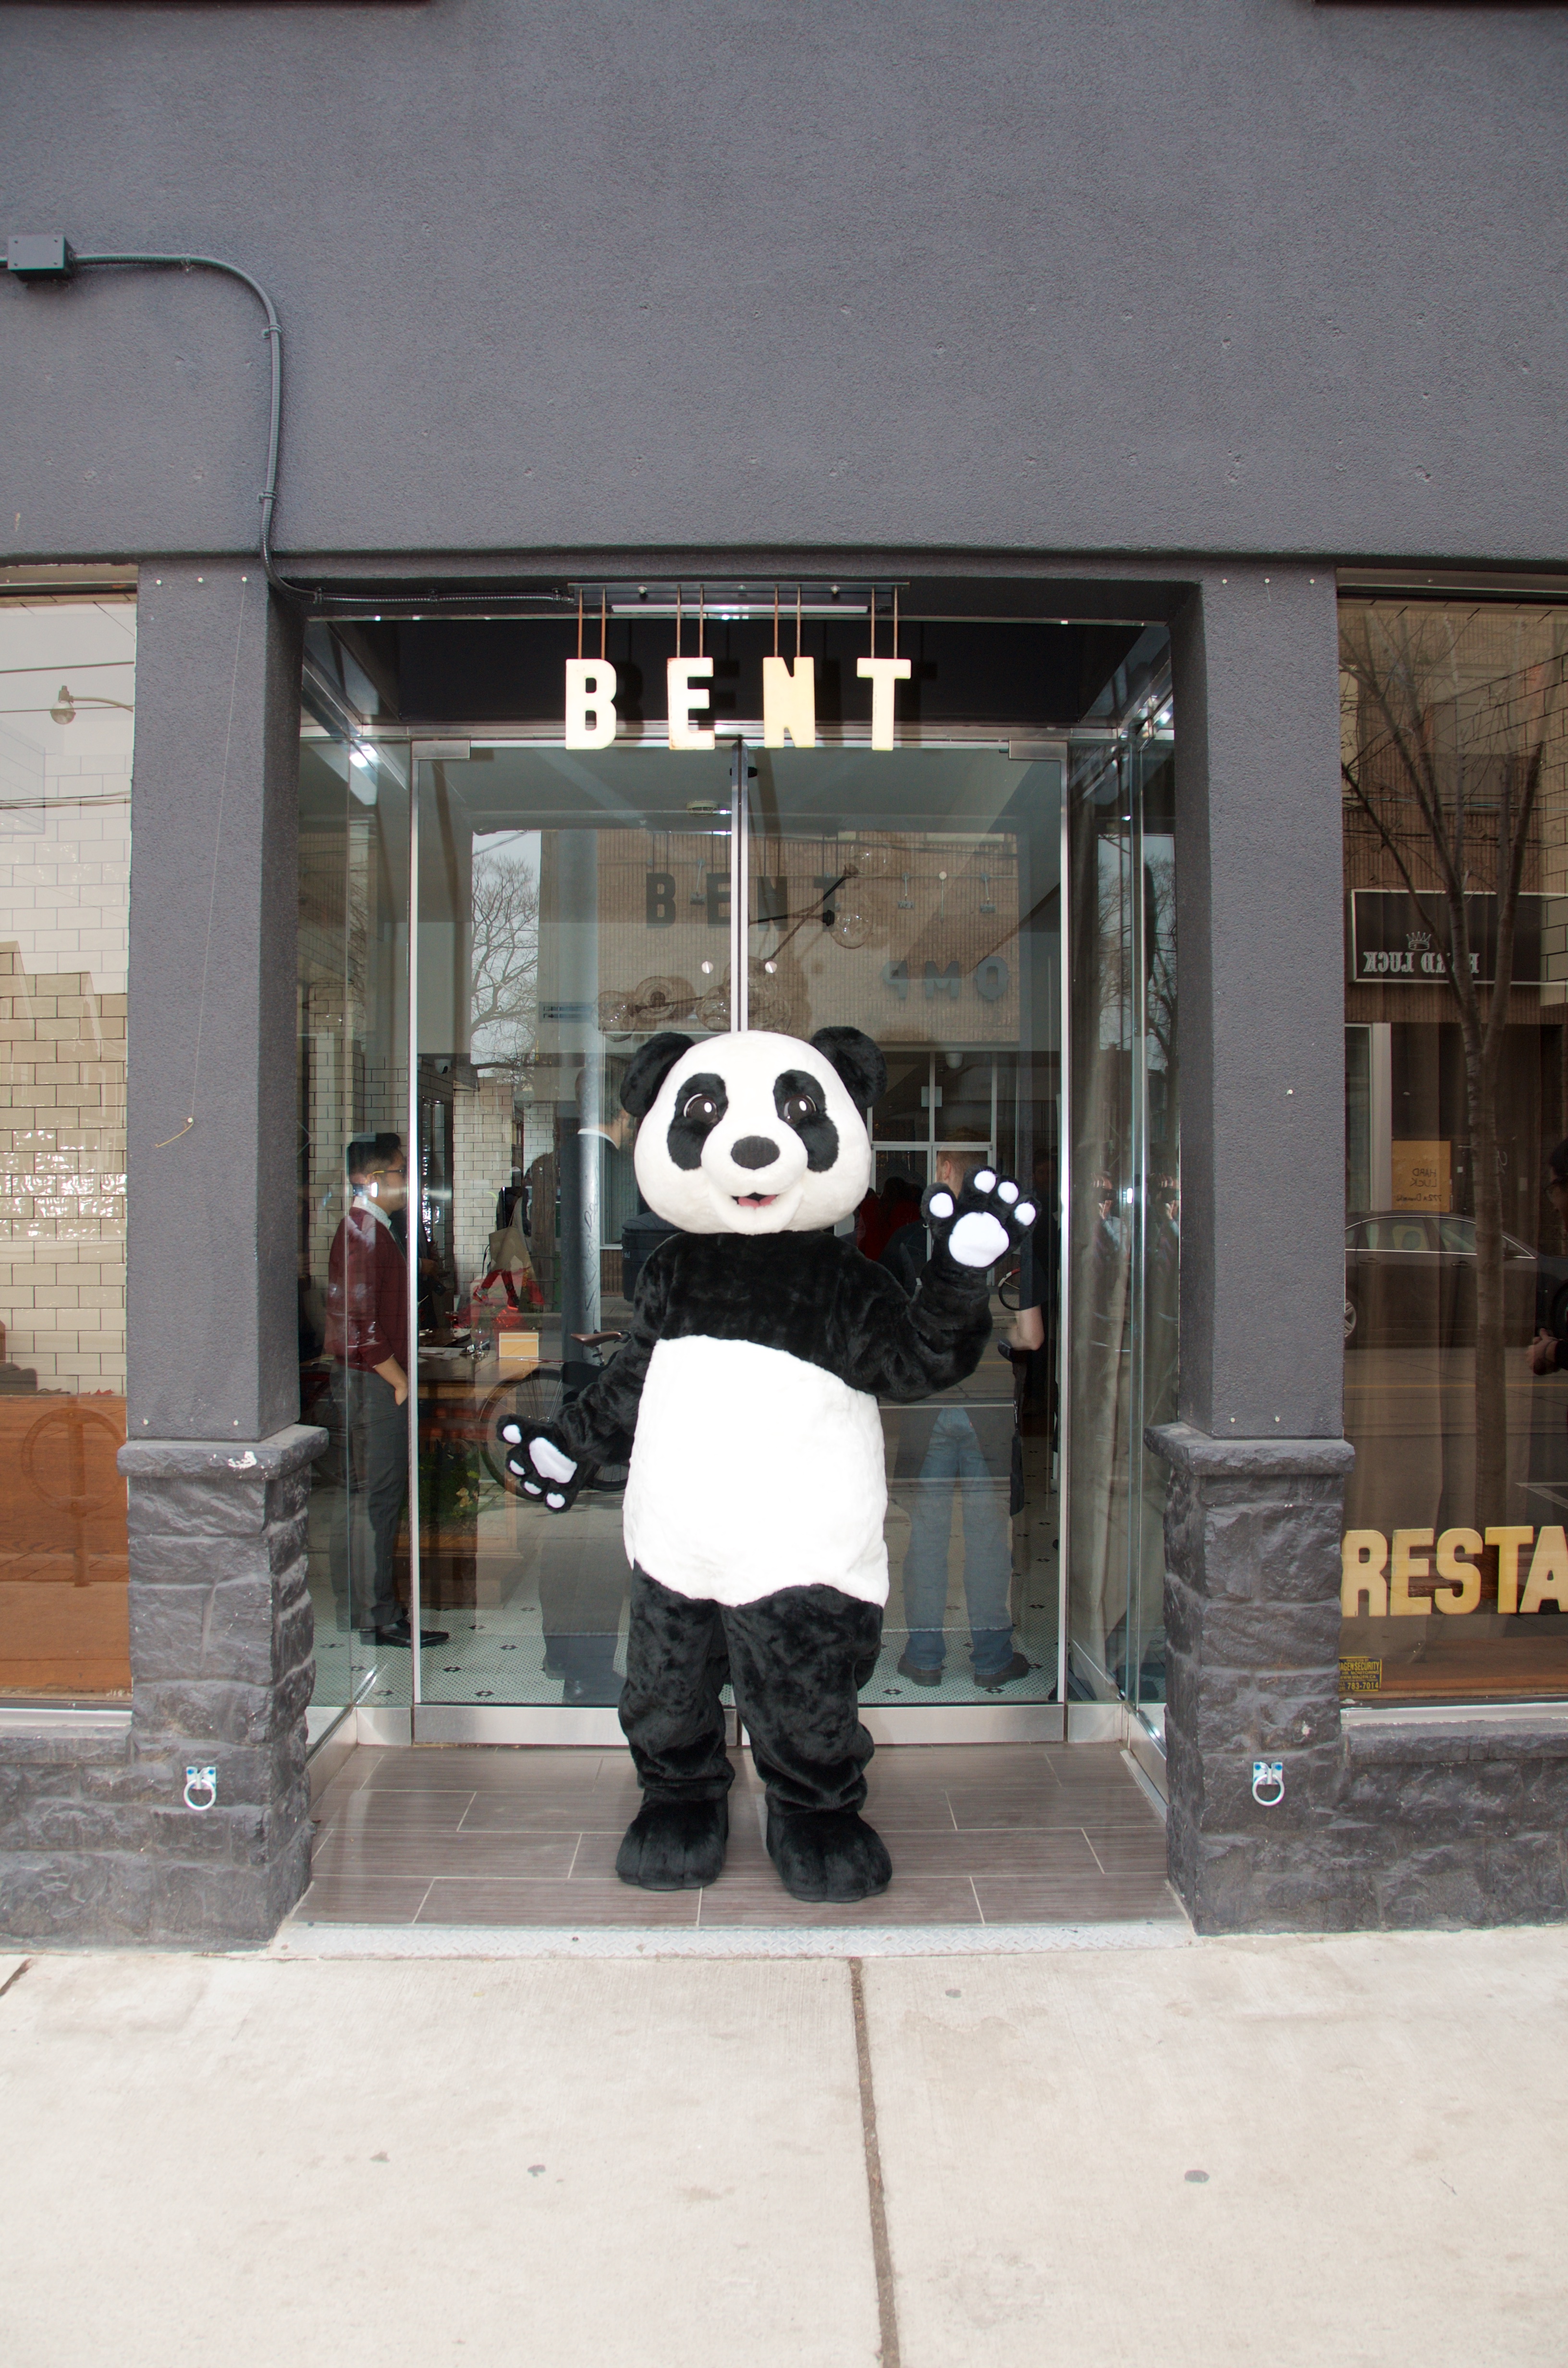 In case you're wondering, the door is beside the panda, not behind him. Photo courtesy WWF Canada.